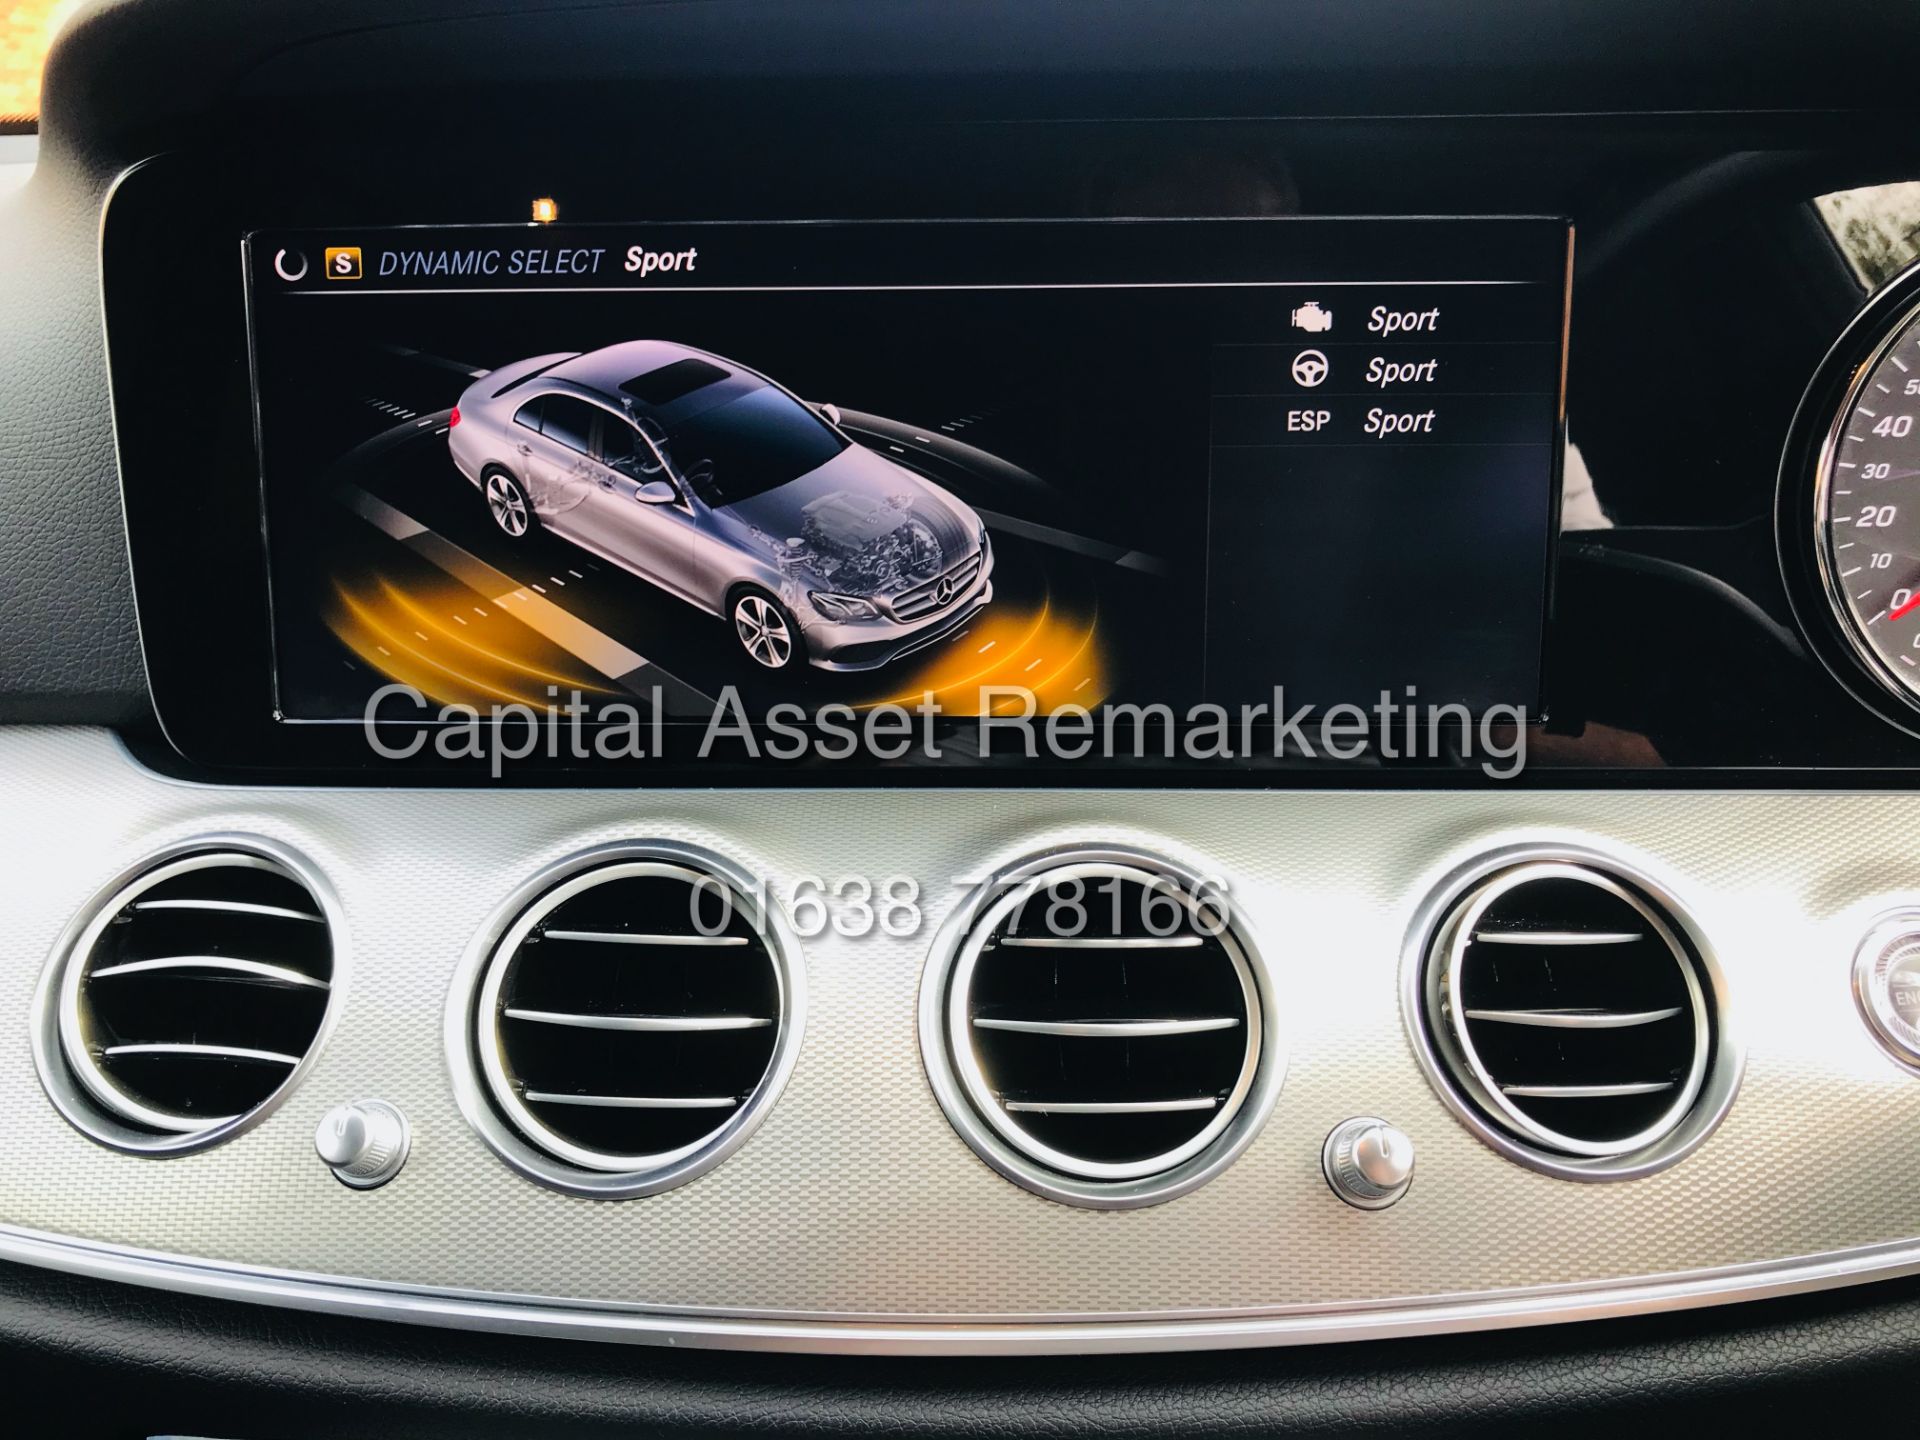 (On Sale) MERCEDES E220d "SPECIAL EQUIPMENT" AUTO (2019) 1 OWNER *GREAT SPEC* TAKE A PEEK - Image 27 of 35